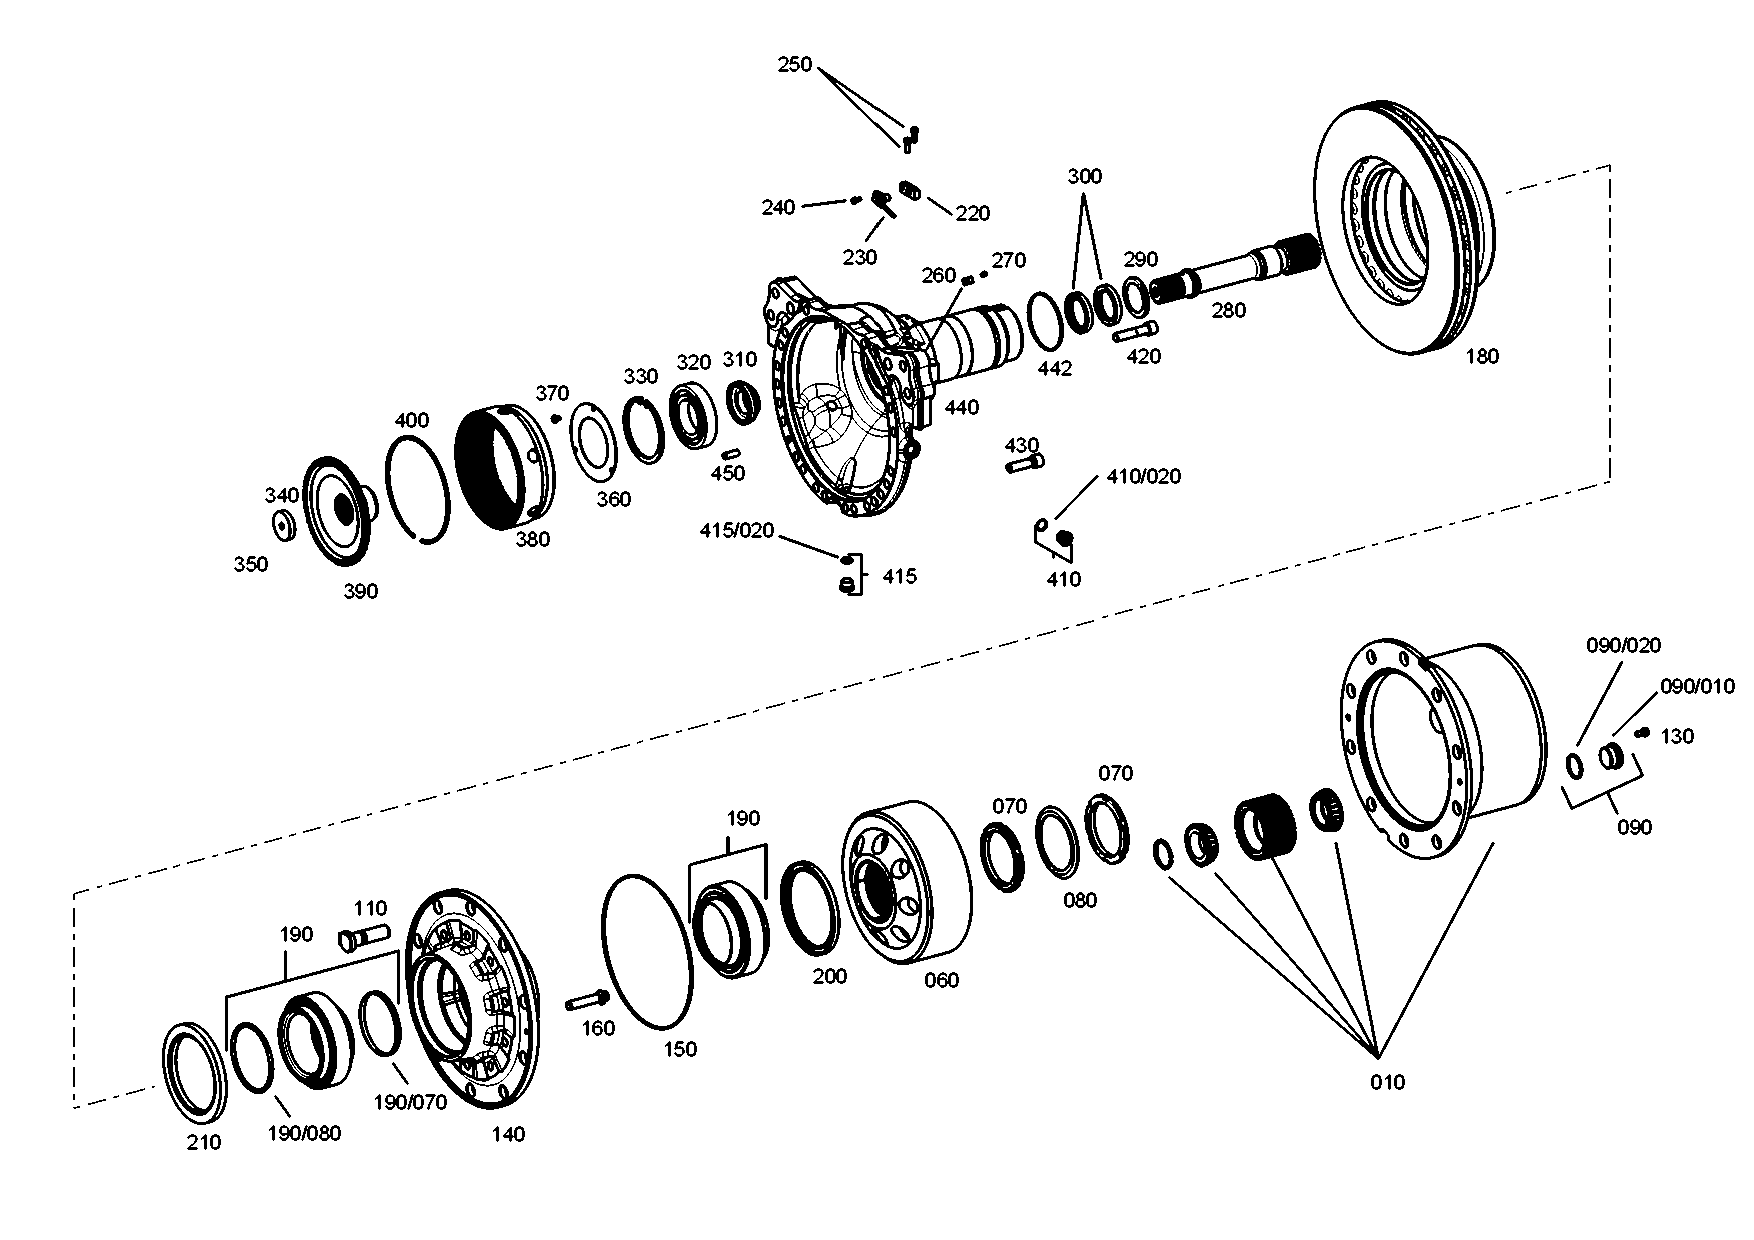 drawing for VOITH-GETRIEBE KG 01.0043.09 - O-RING (figure 4)